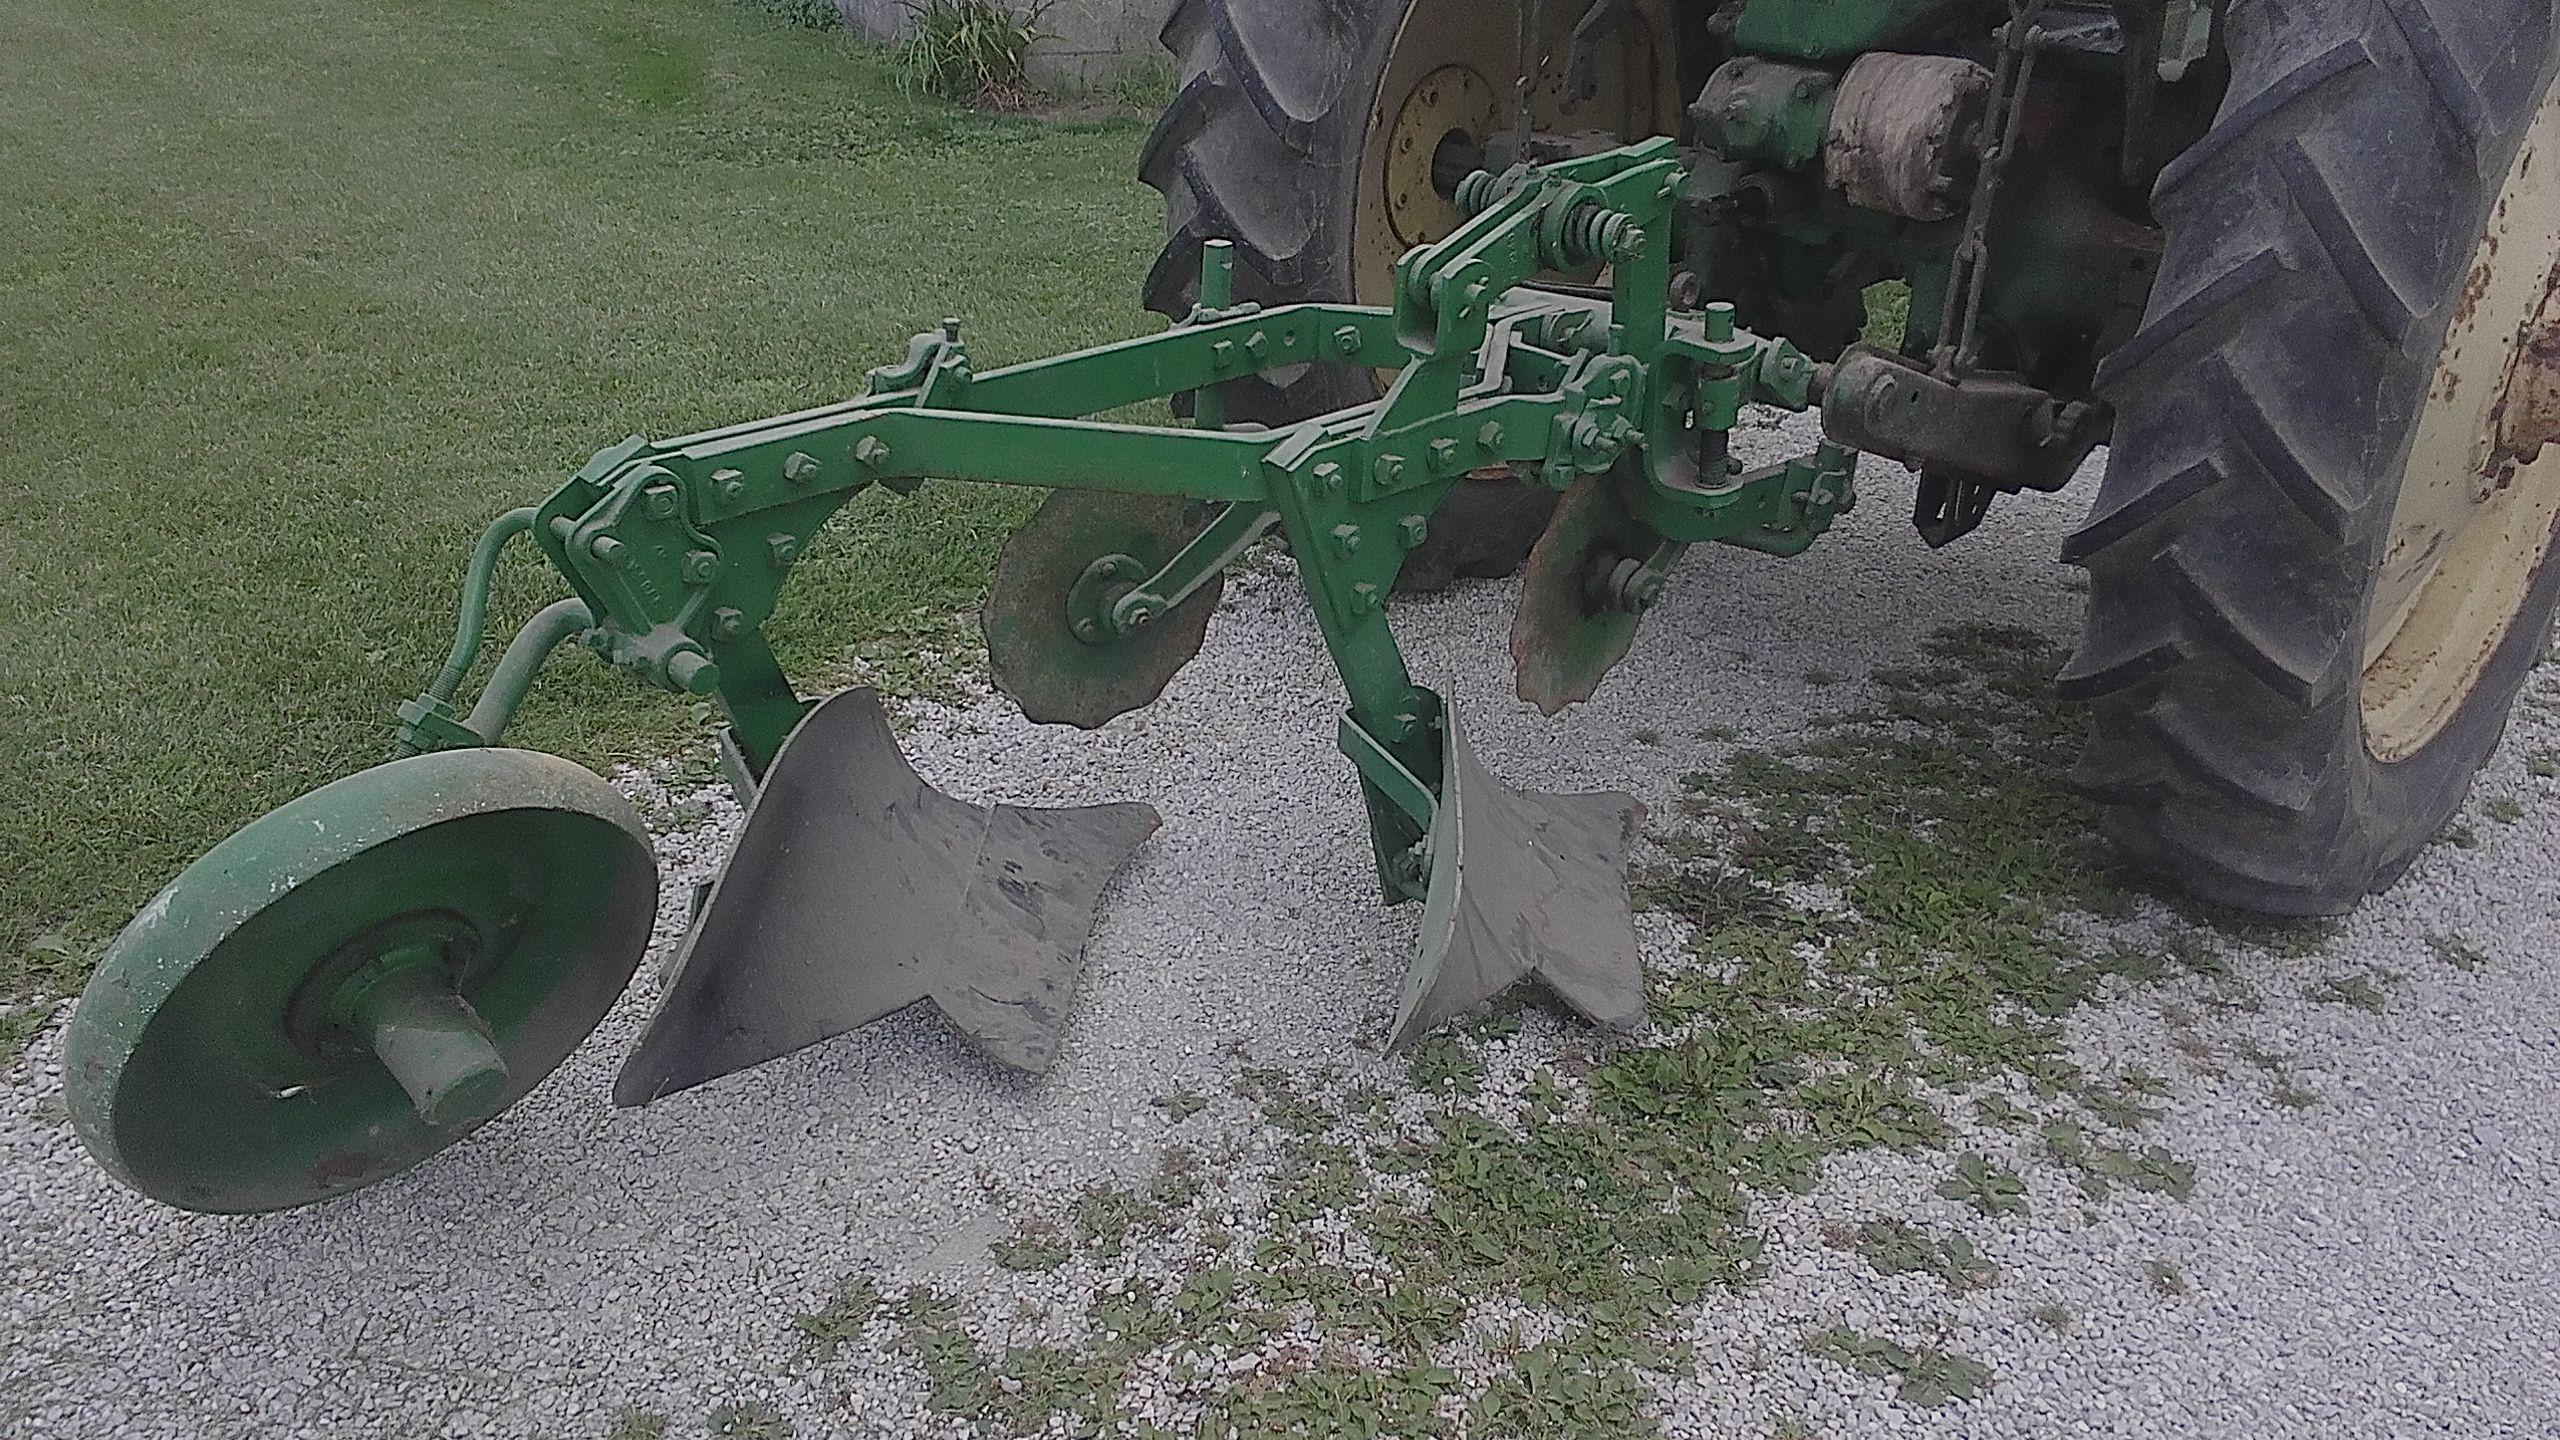 JD MT Tractor, New Battery, 90% Tires, Belt Pully, Standard Hitch, Steps, (SN 15763) selling with M2